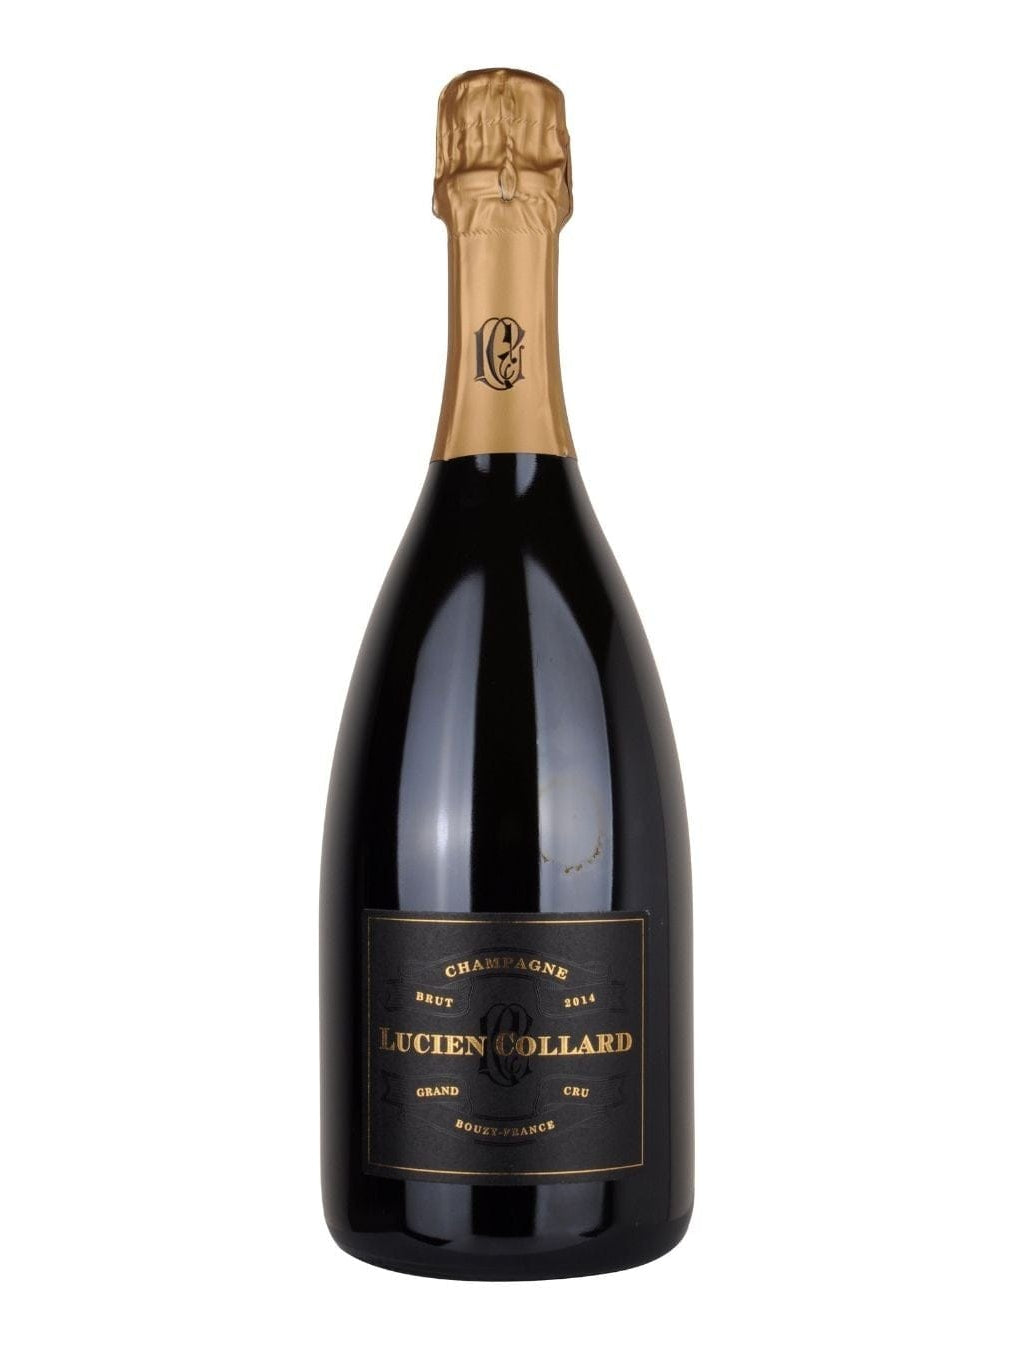 Shop Champagne Lucien Collard Champagne Lucien Collard Grand Cru Brut 2014 online at PENTICTON artisanal French wine store in Hong Kong. Discover other French wines, promotions, workshops and featured offers at pentictonpacific.com 